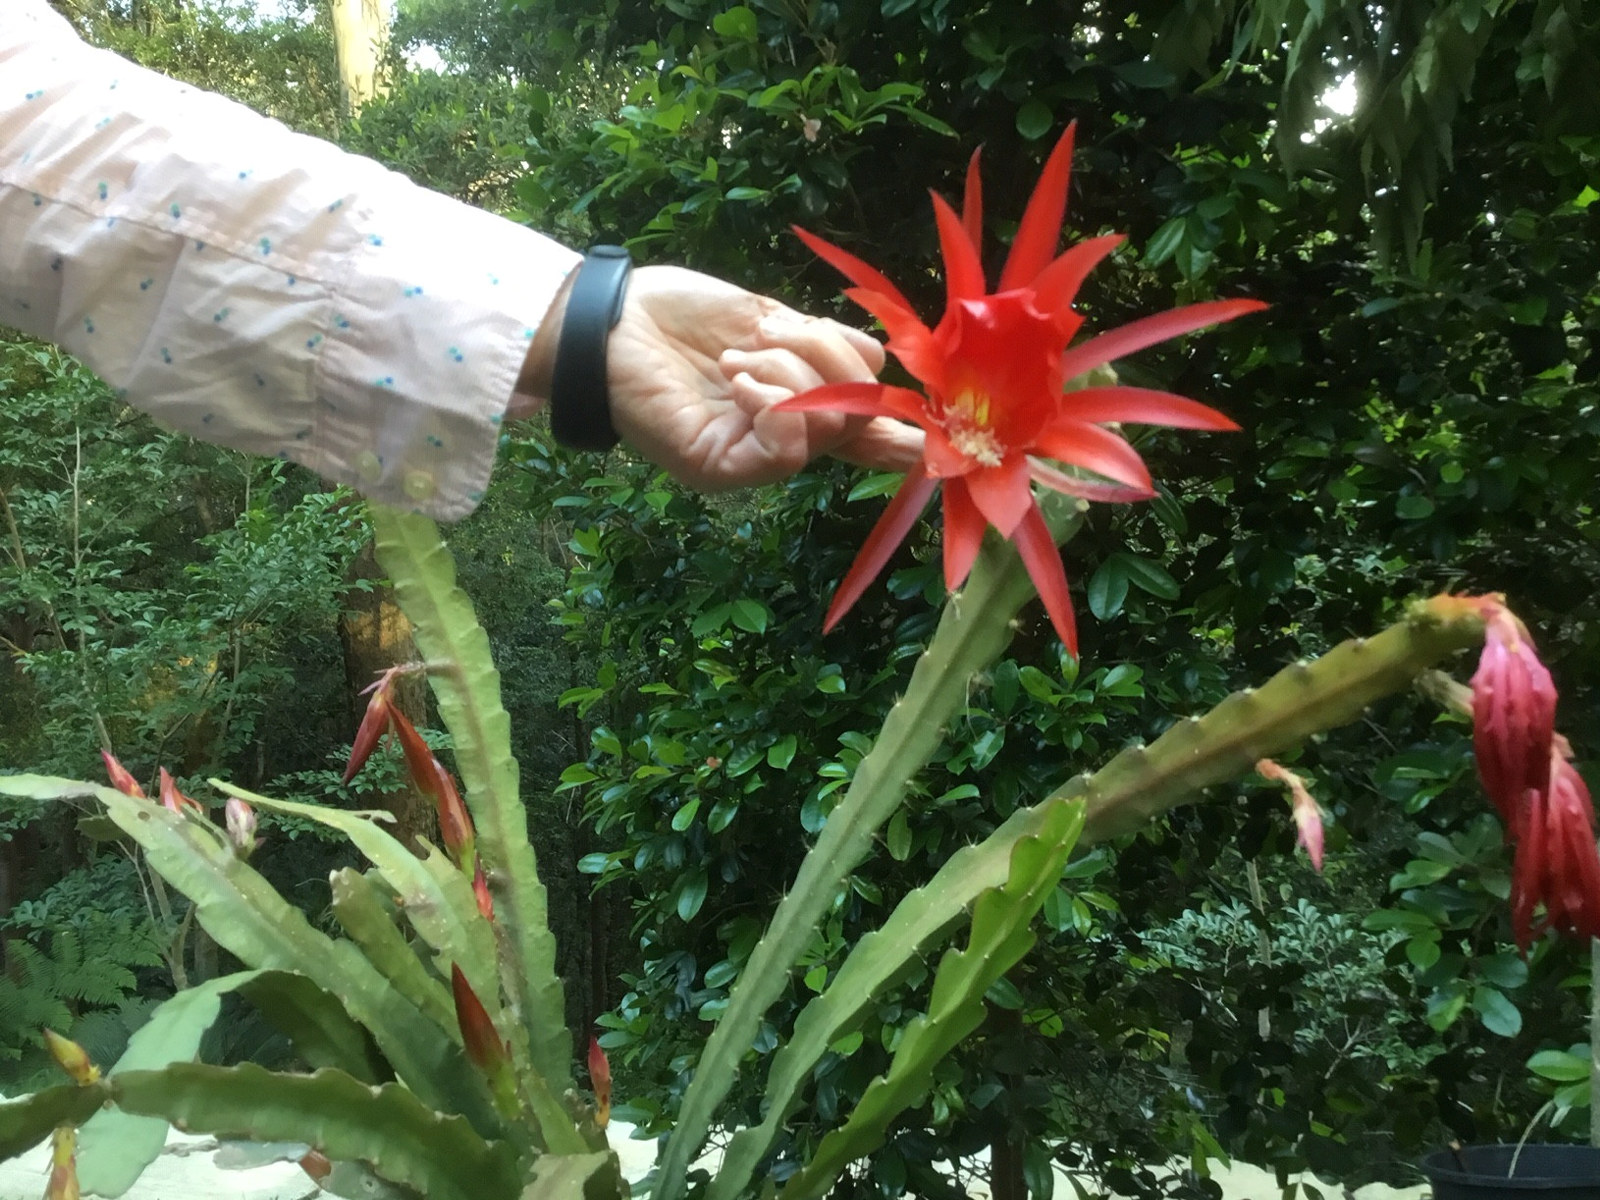 Arm extended with hand holding red spiky flower head.